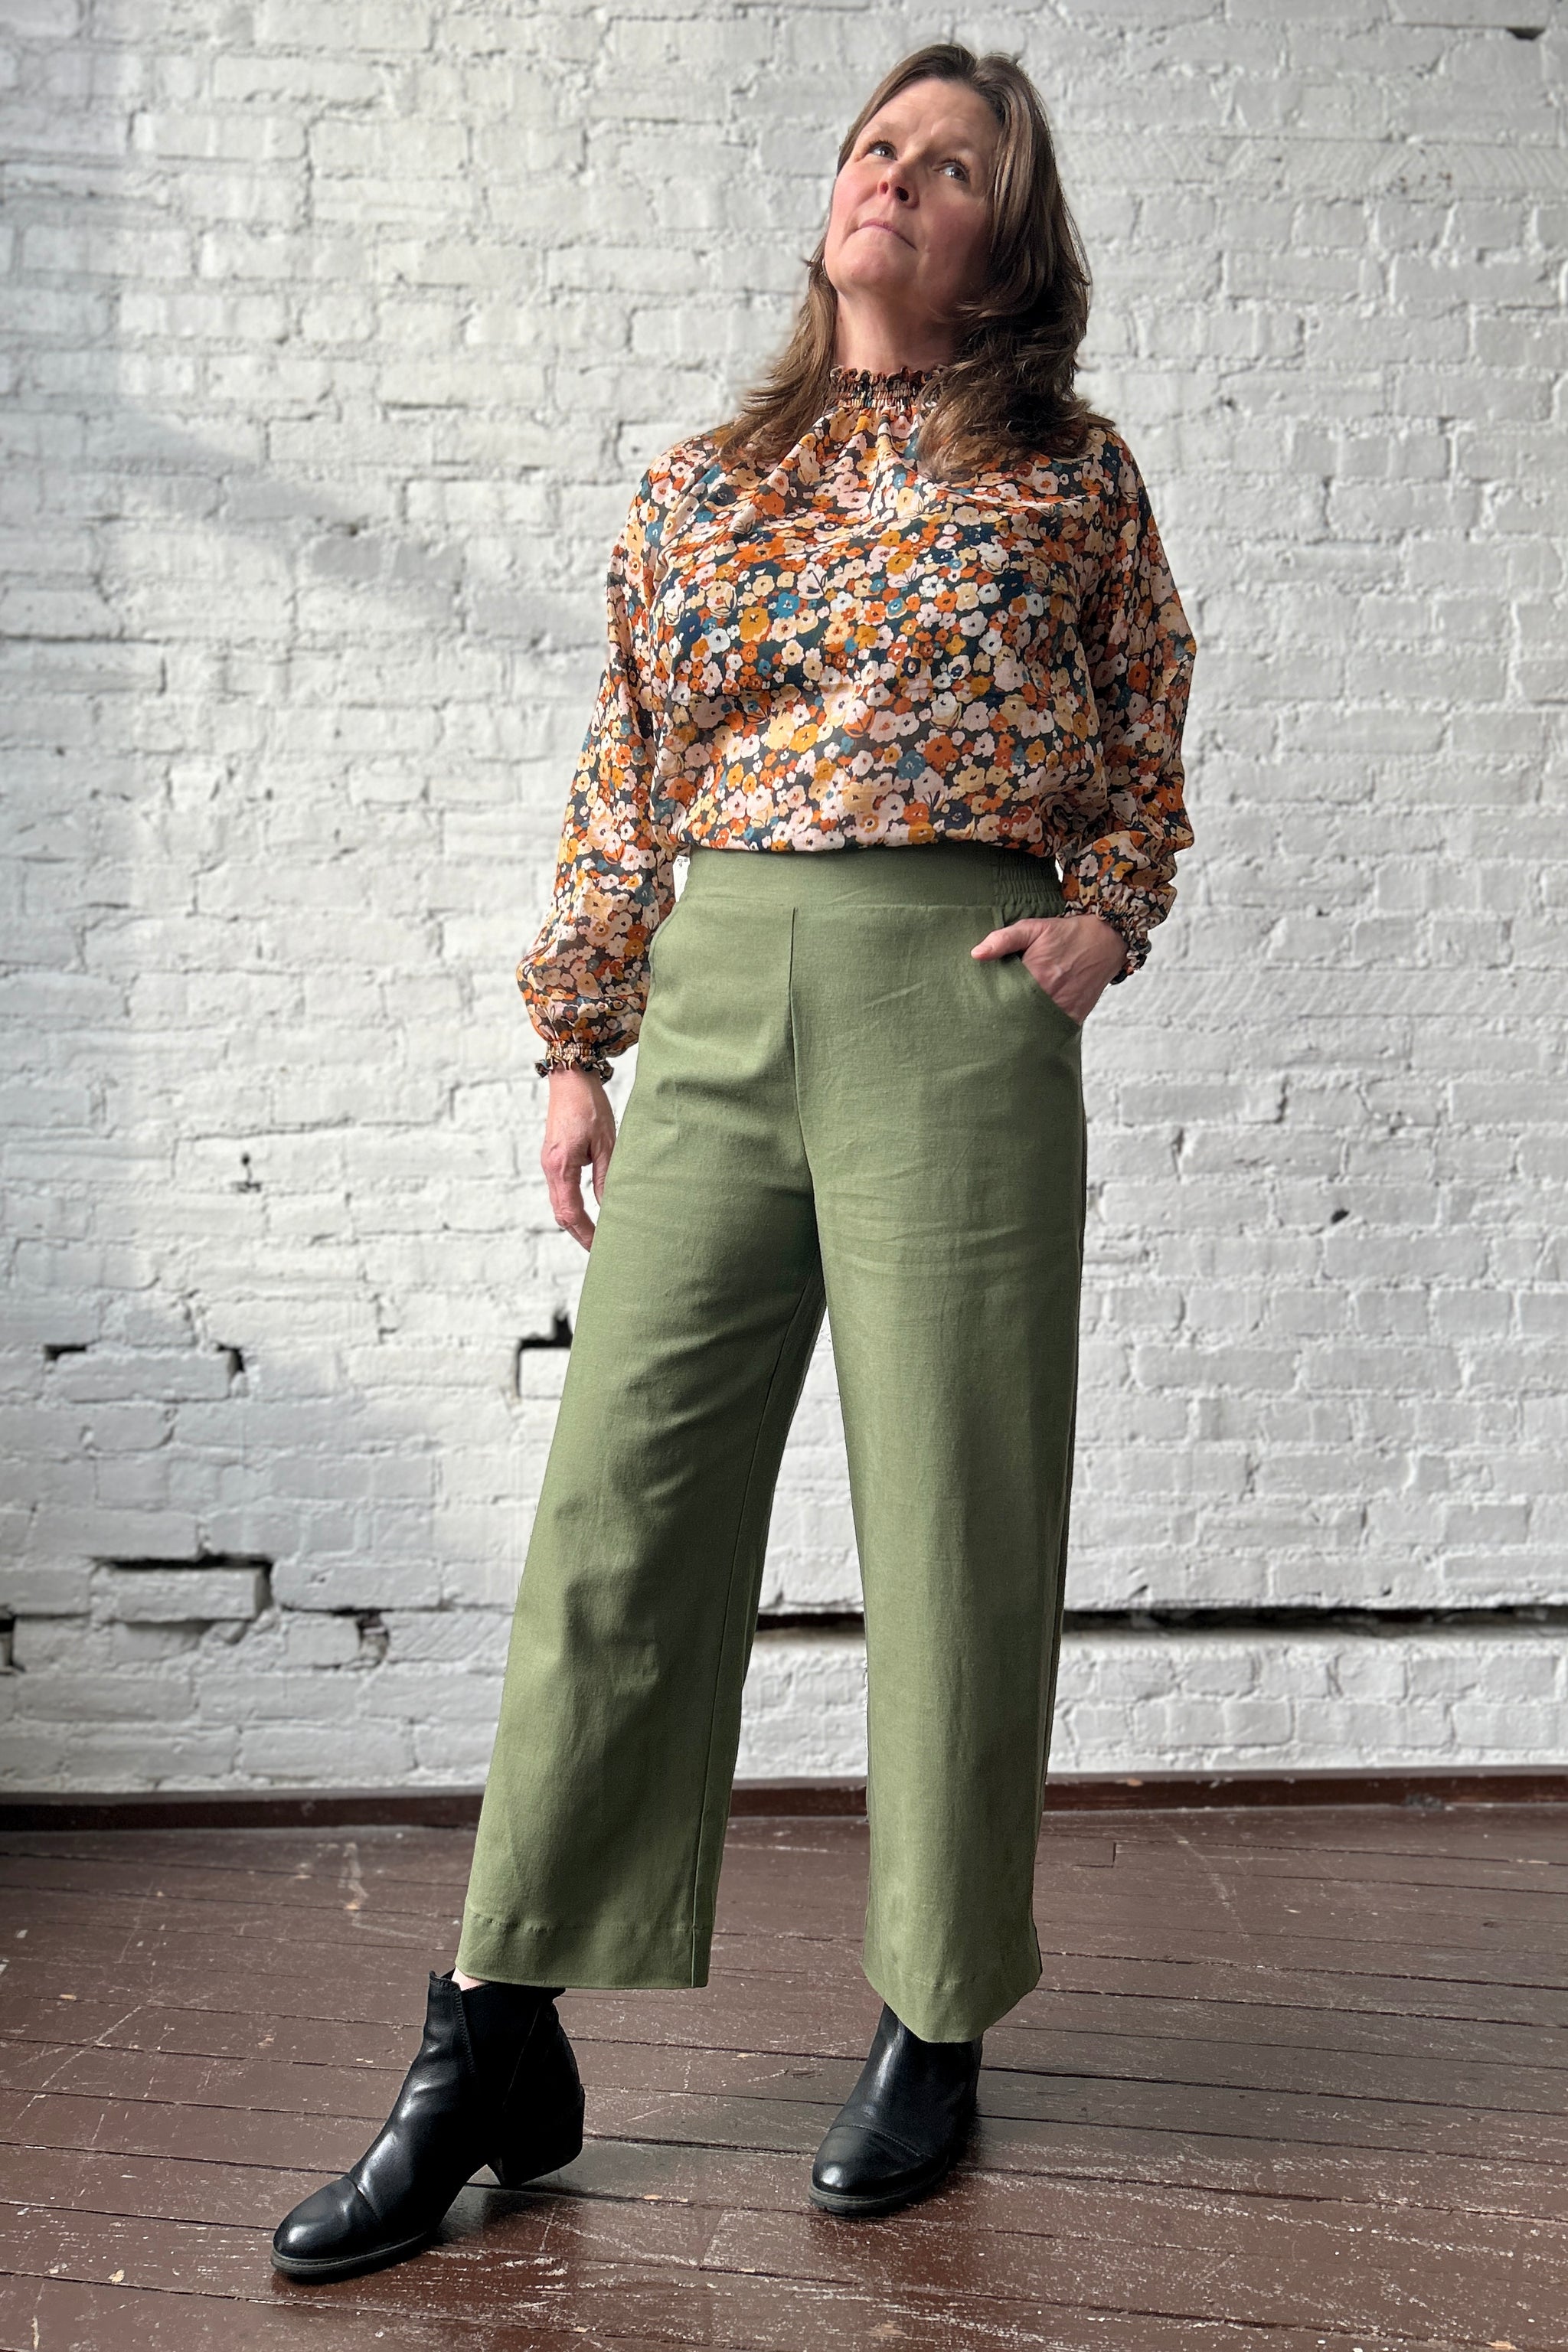 Person wearing olive-green, linen-blend trousers and floral blouse stands with hand on hip, with one leg forward. Trousers are high waist and wide leg with an elastic waistband and flat front.